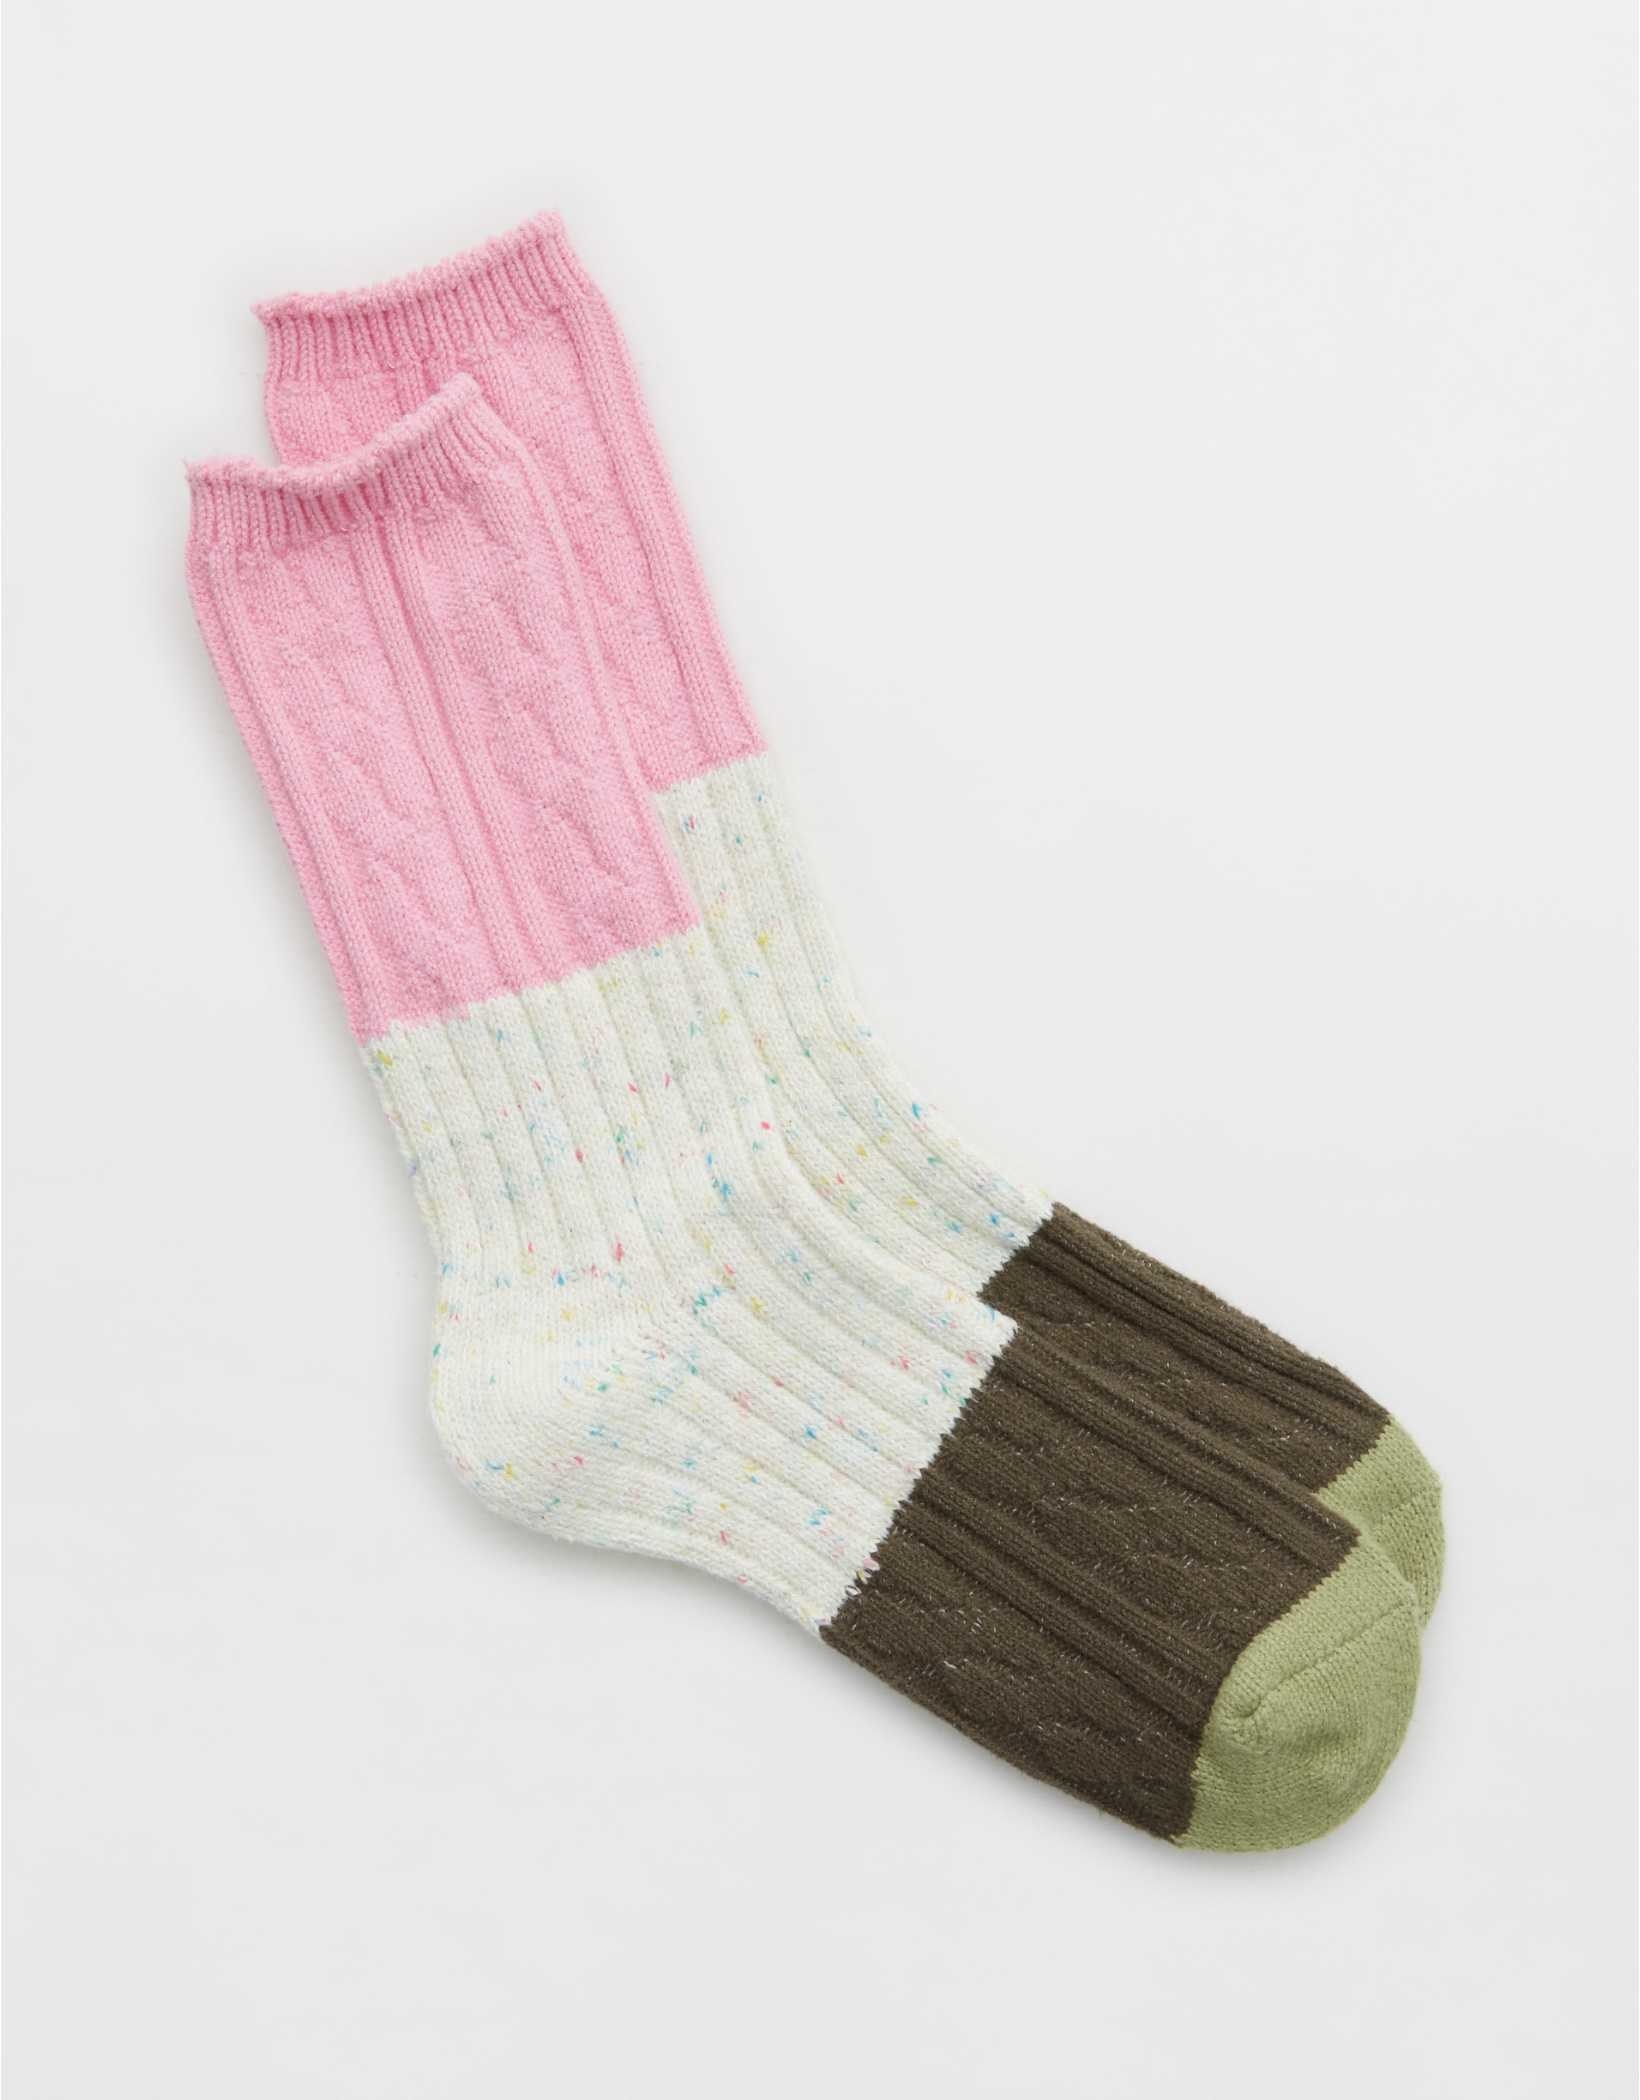 ribbed crew socks with green toes, olive heels, confetti speckled white middles, and pink tops